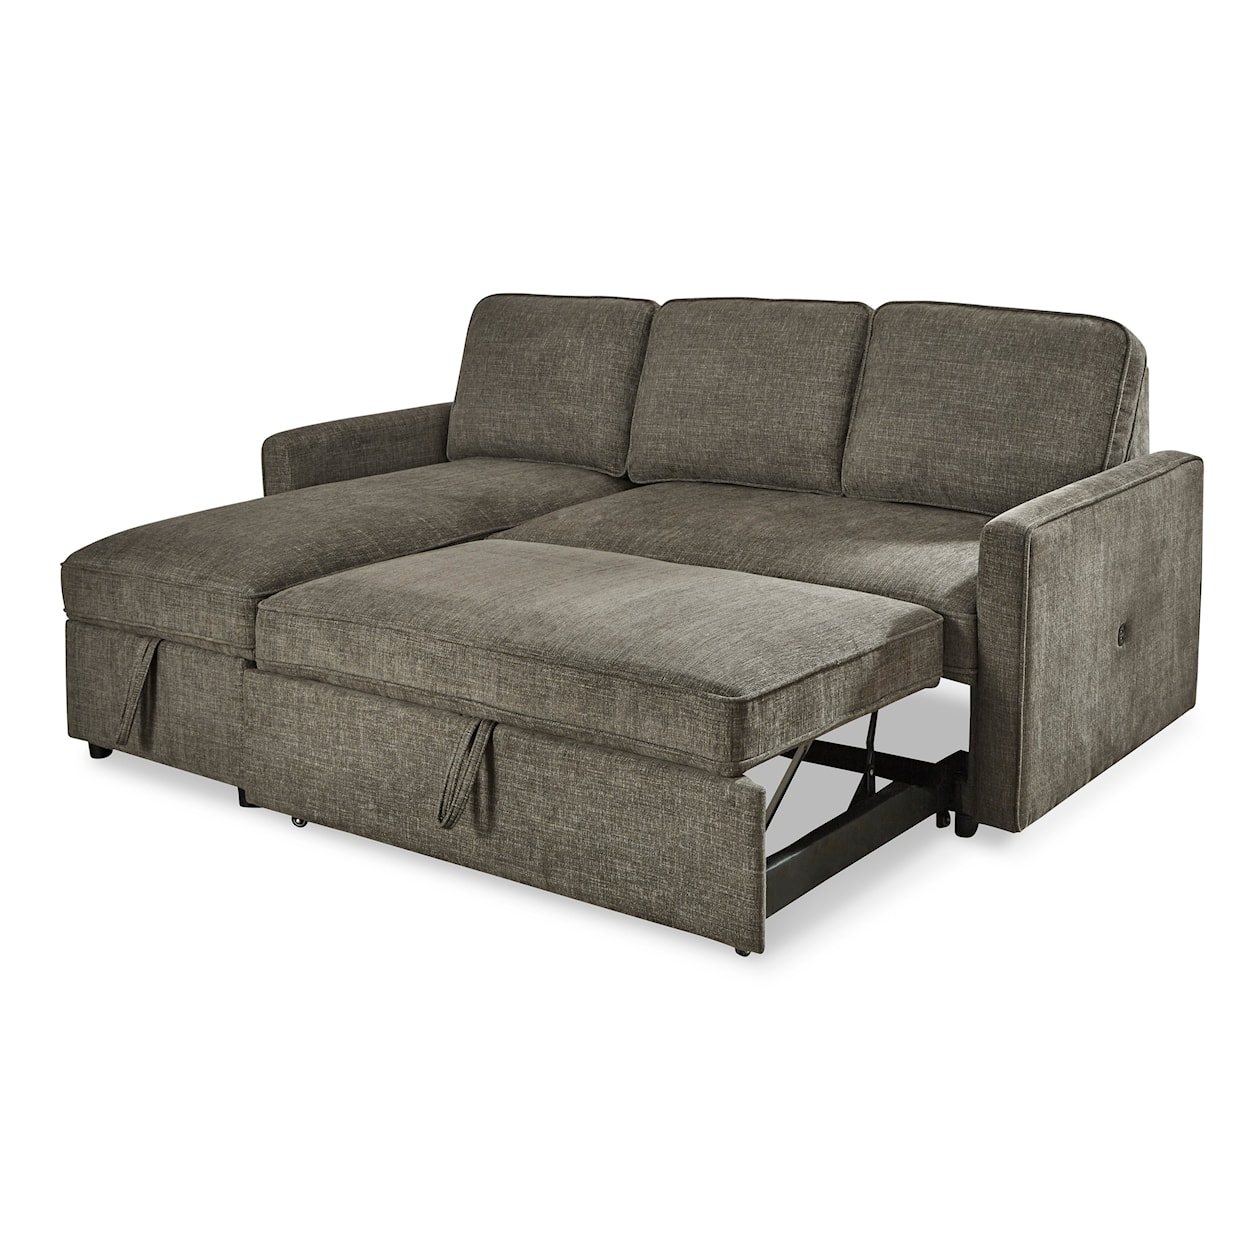 Benchcraft Kerle 2-Piece Sectional with Pop Up Bed